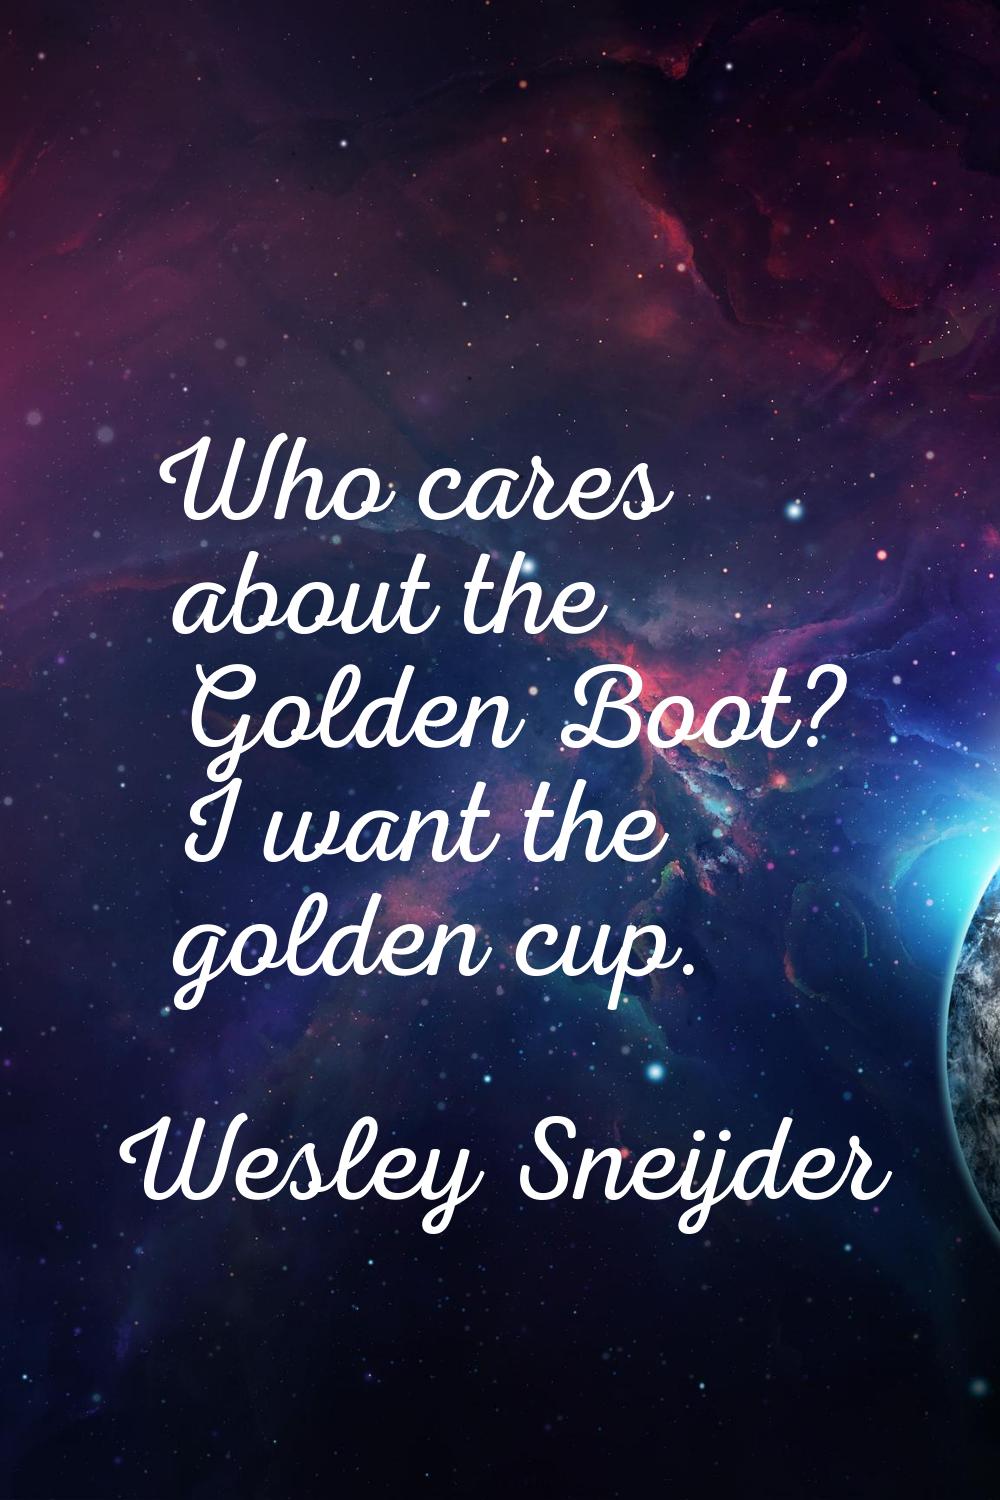 Who cares about the Golden Boot? I want the golden cup.